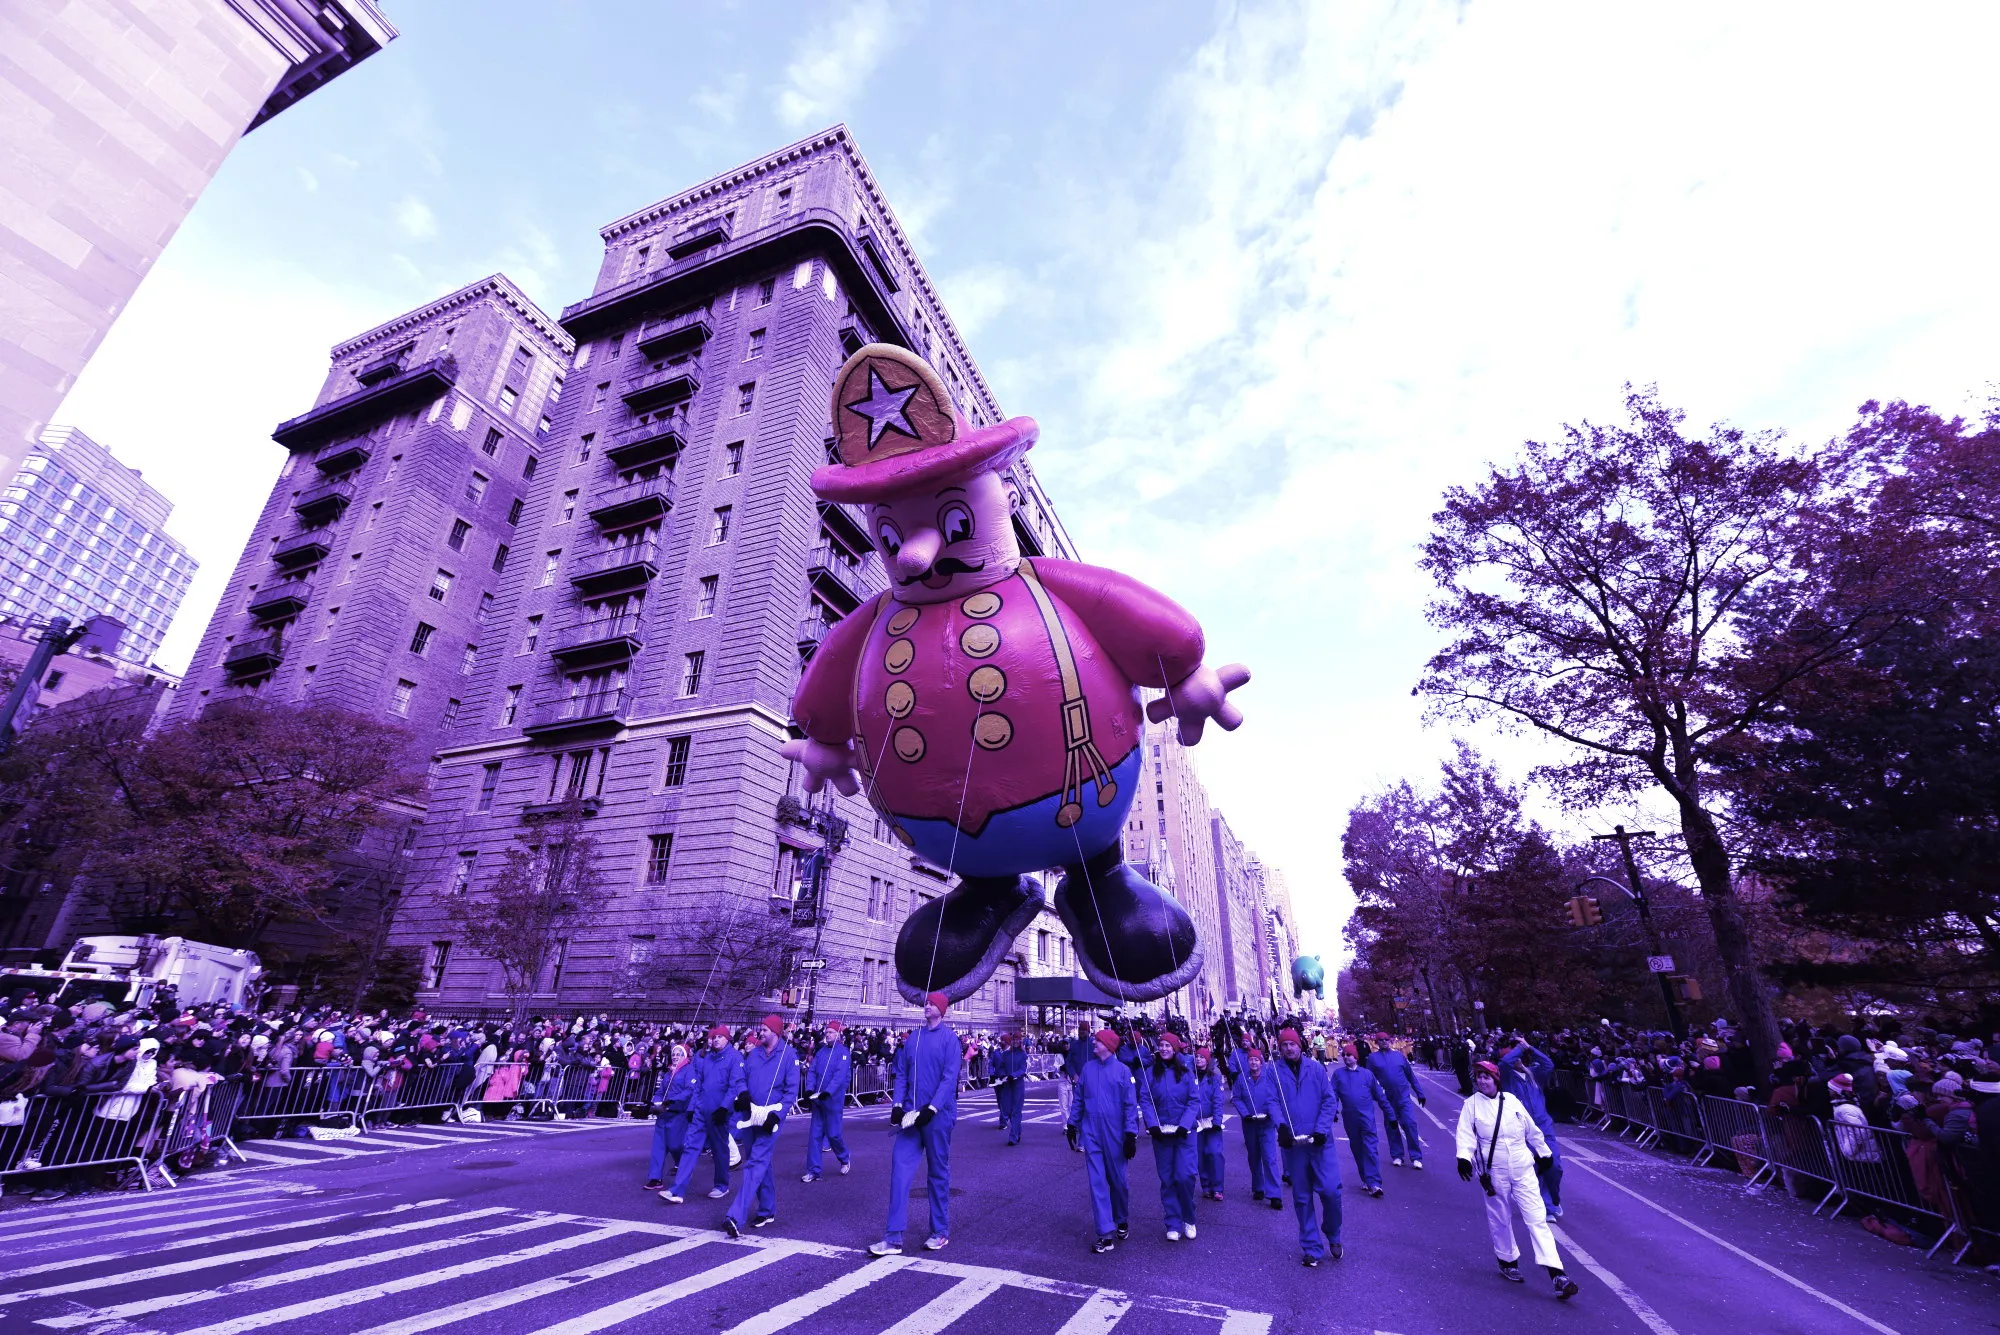 2016 Macy's Thanksgiving Day Parade. Image: Shutterstock